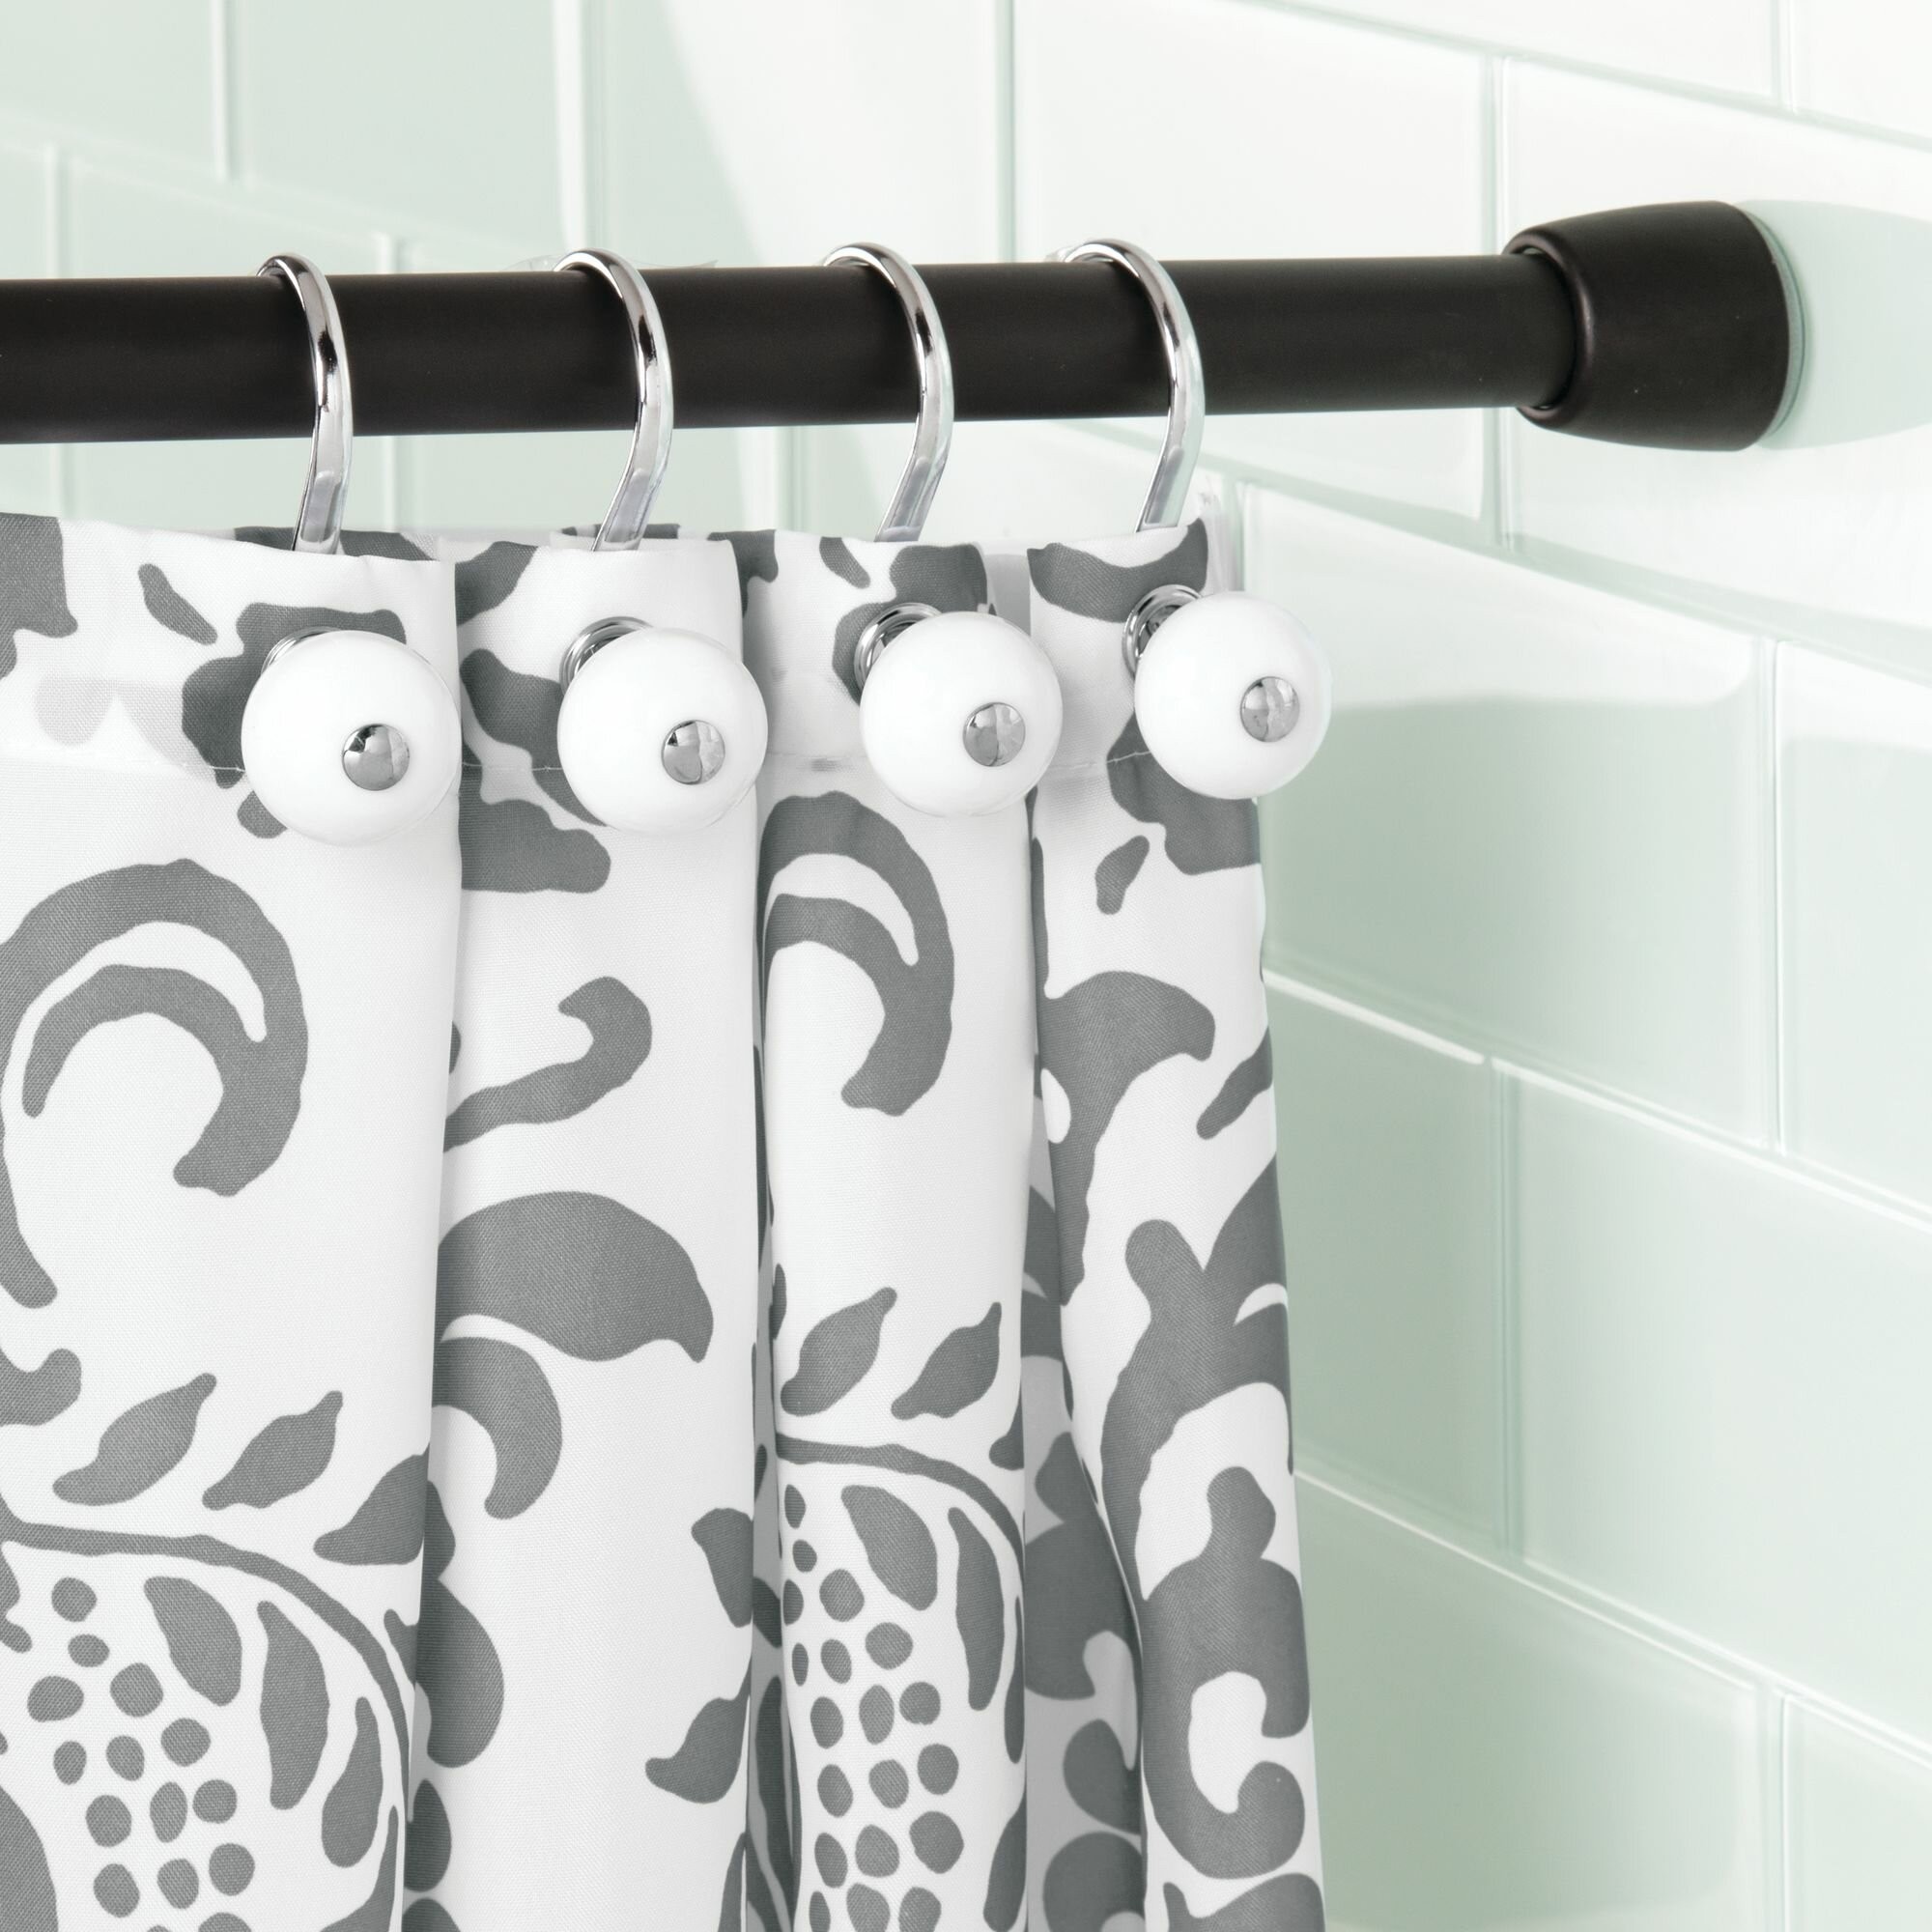 Proulx 108" Adjustable Straight Tension Shower Curtain Rod